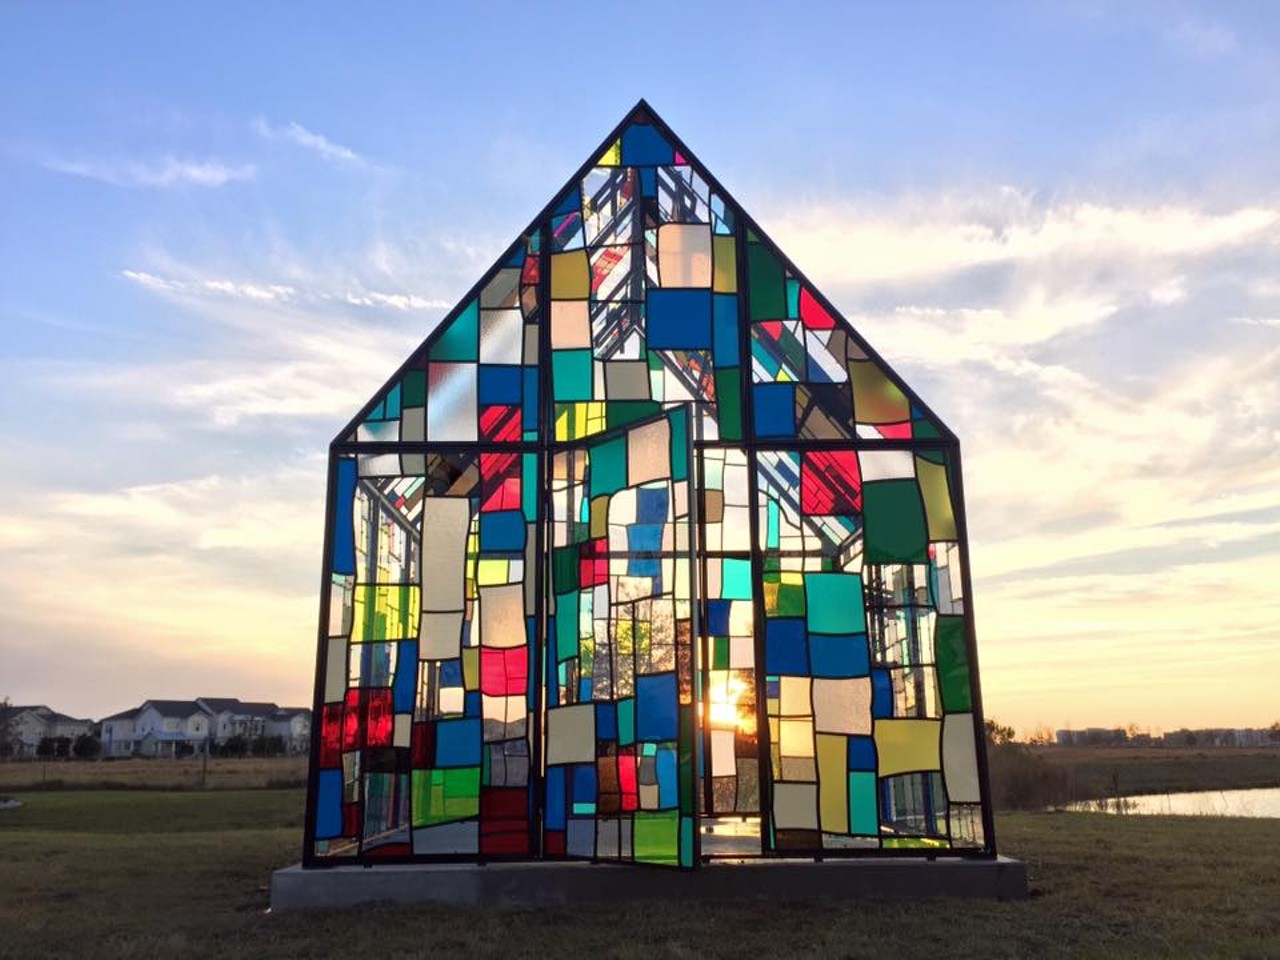 Tom Fruin&#146;s Glass House at Lake Nona 
13615 Sachs Ave.
Installed in 2016, the Glass House is made with reclaimed materials and takes inspiration from American folk art. The piercing sunlight and mosaic glass will make for a heavenly photo op. 
Photo via Lake Nona/Facebook